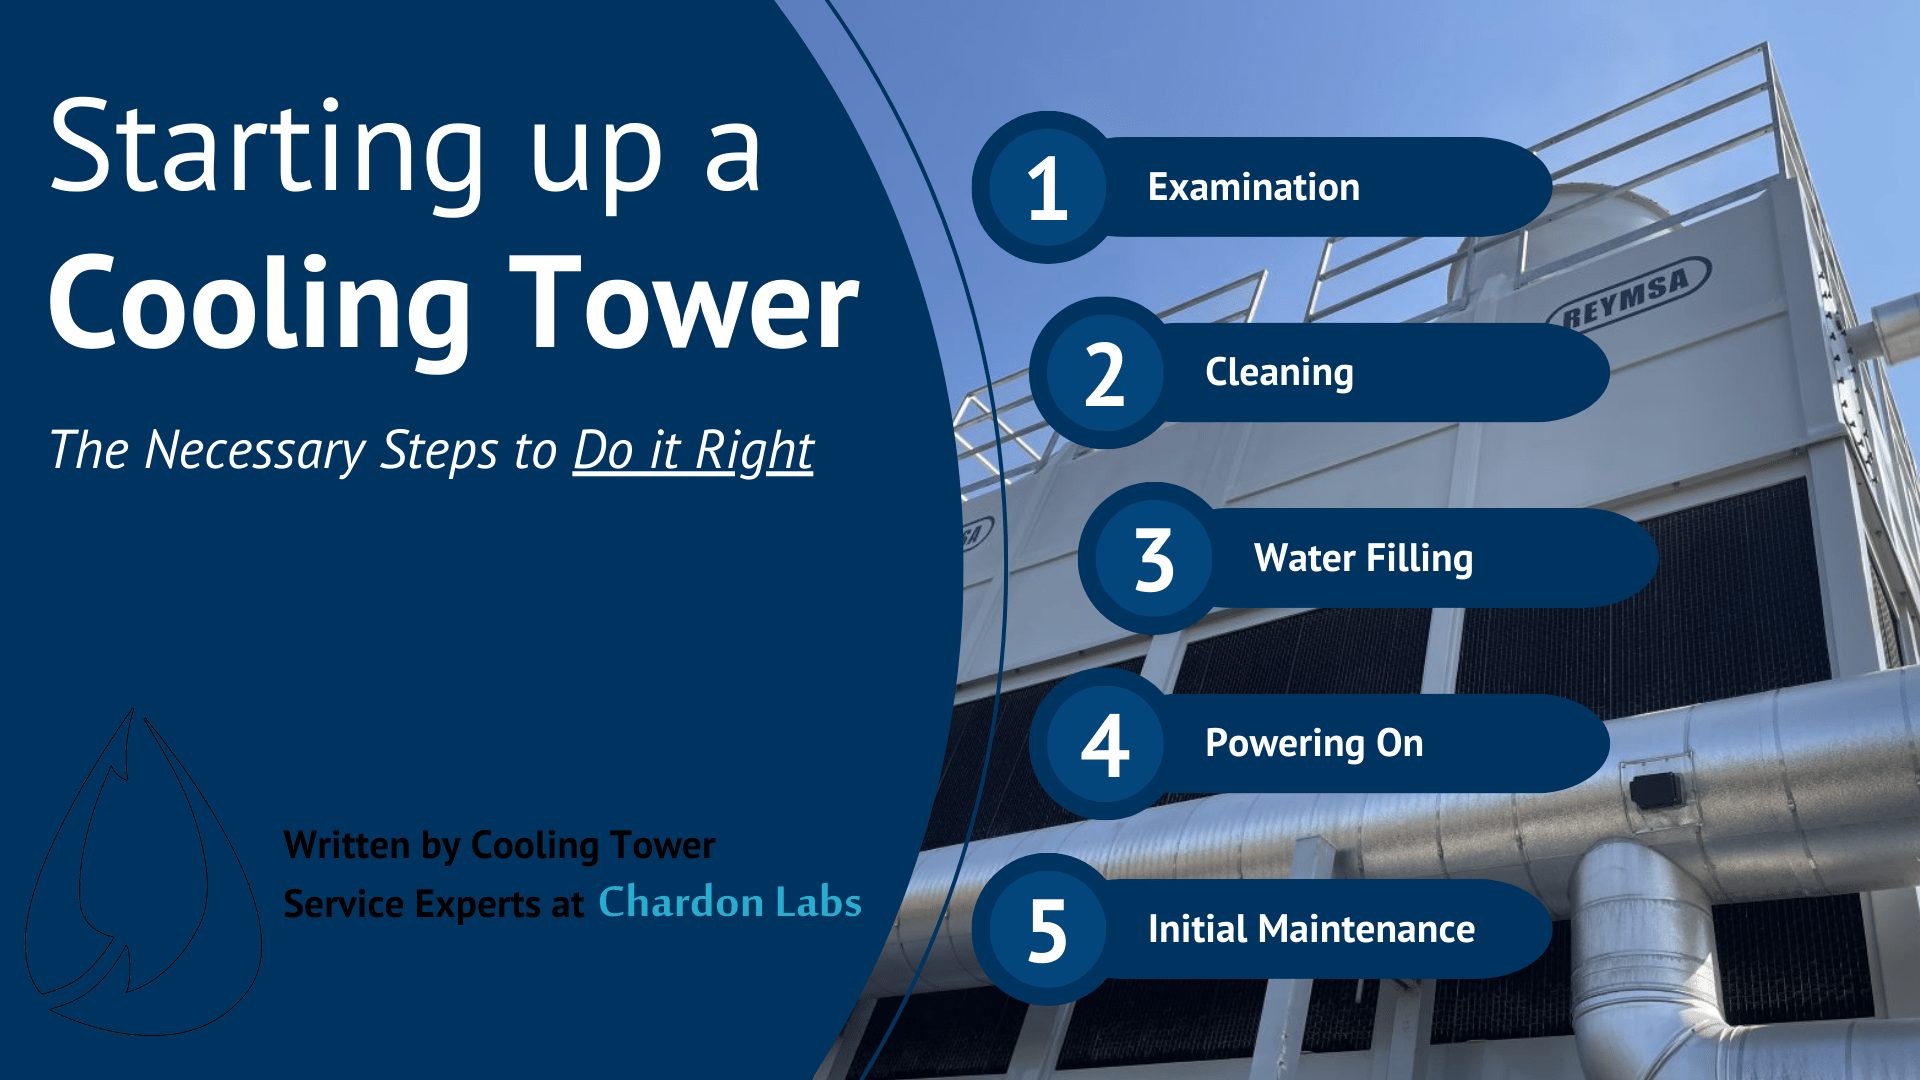 Starting up a Cooling tower, the necessary steps to do it right. This article includes 5 sections: examination, cleaning, water filling, powering on, and initial maintenance.